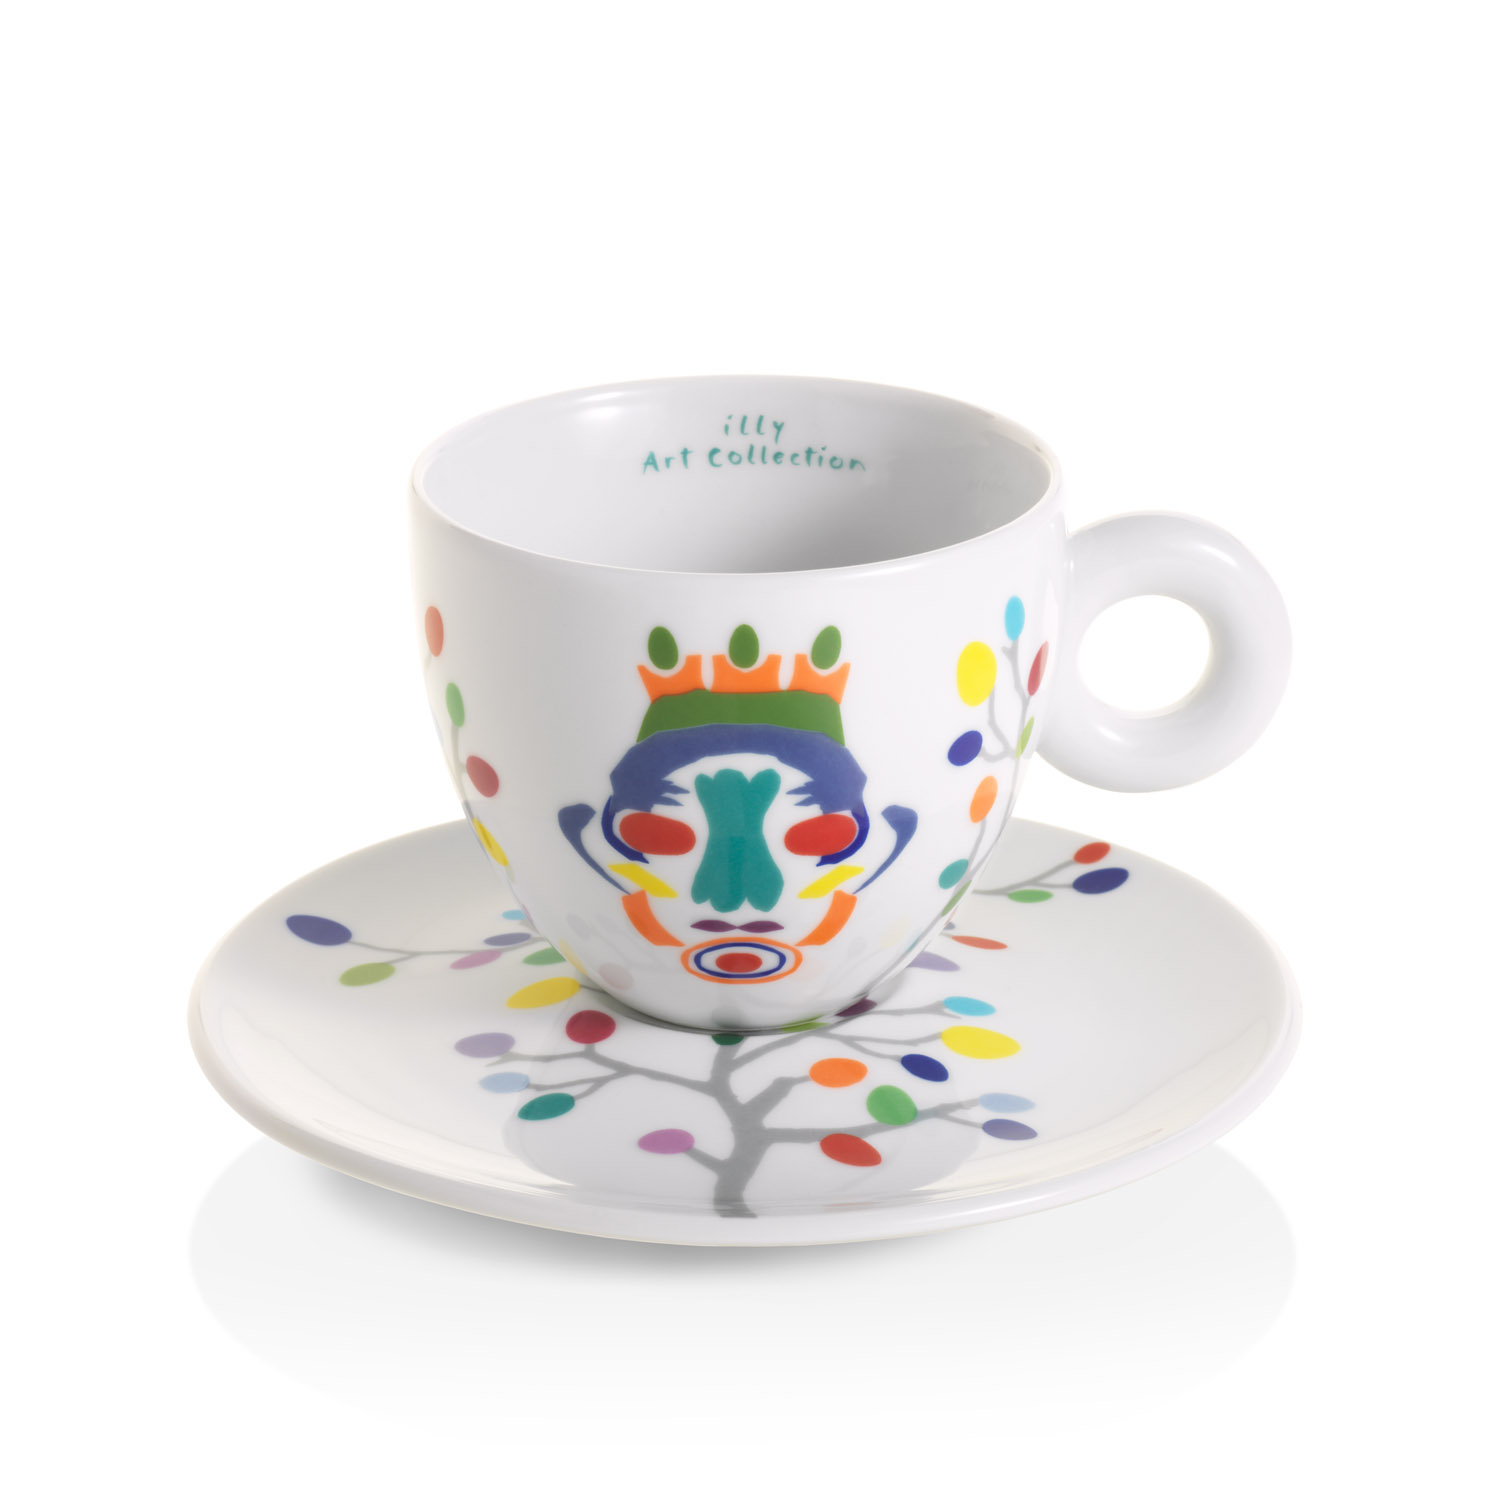 illy Art Collection PASCALE MARTHINE TAYOU Gift Set 2 Cappuccino Cups, Cups, 02-02-6089